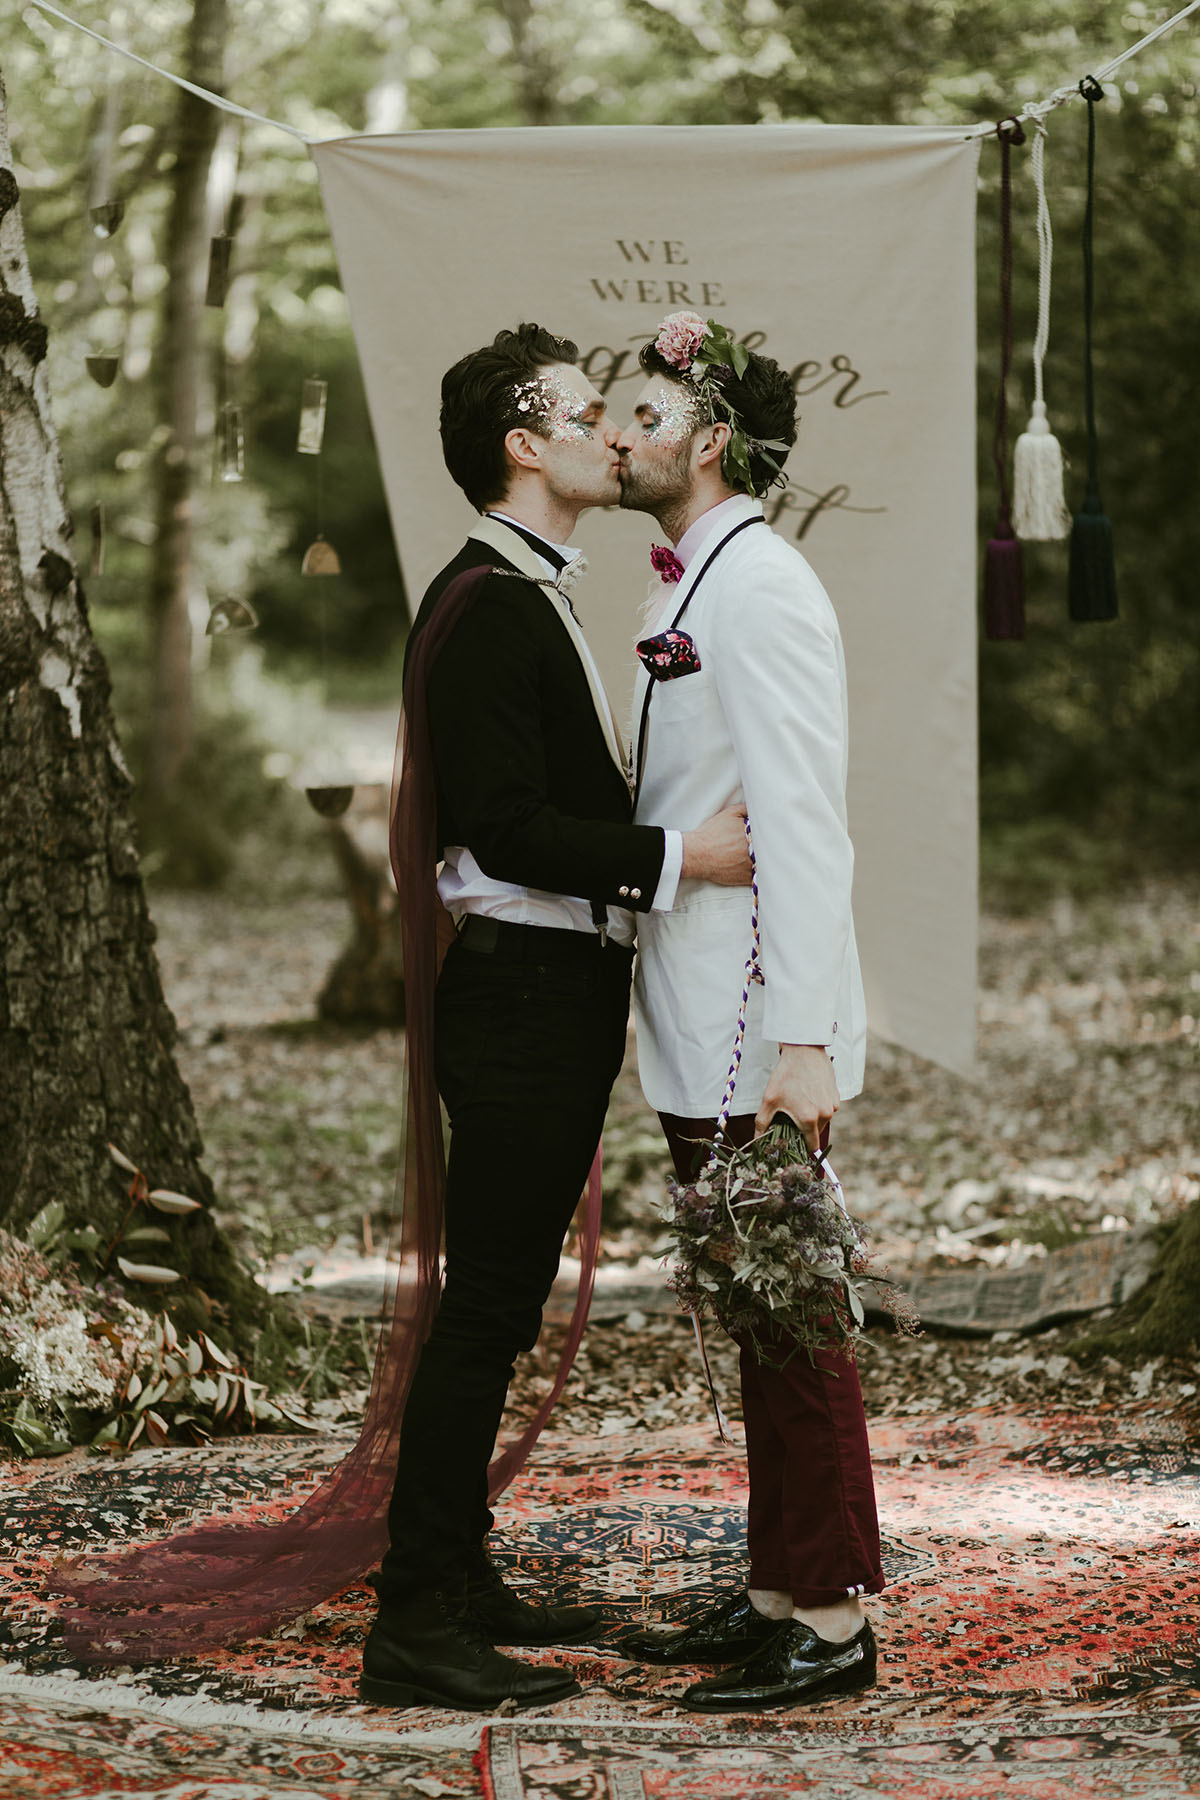 Creative wildflower elopement inspiration in the woods two grooms flowers floral veil suits creative unique styled shoot kiss